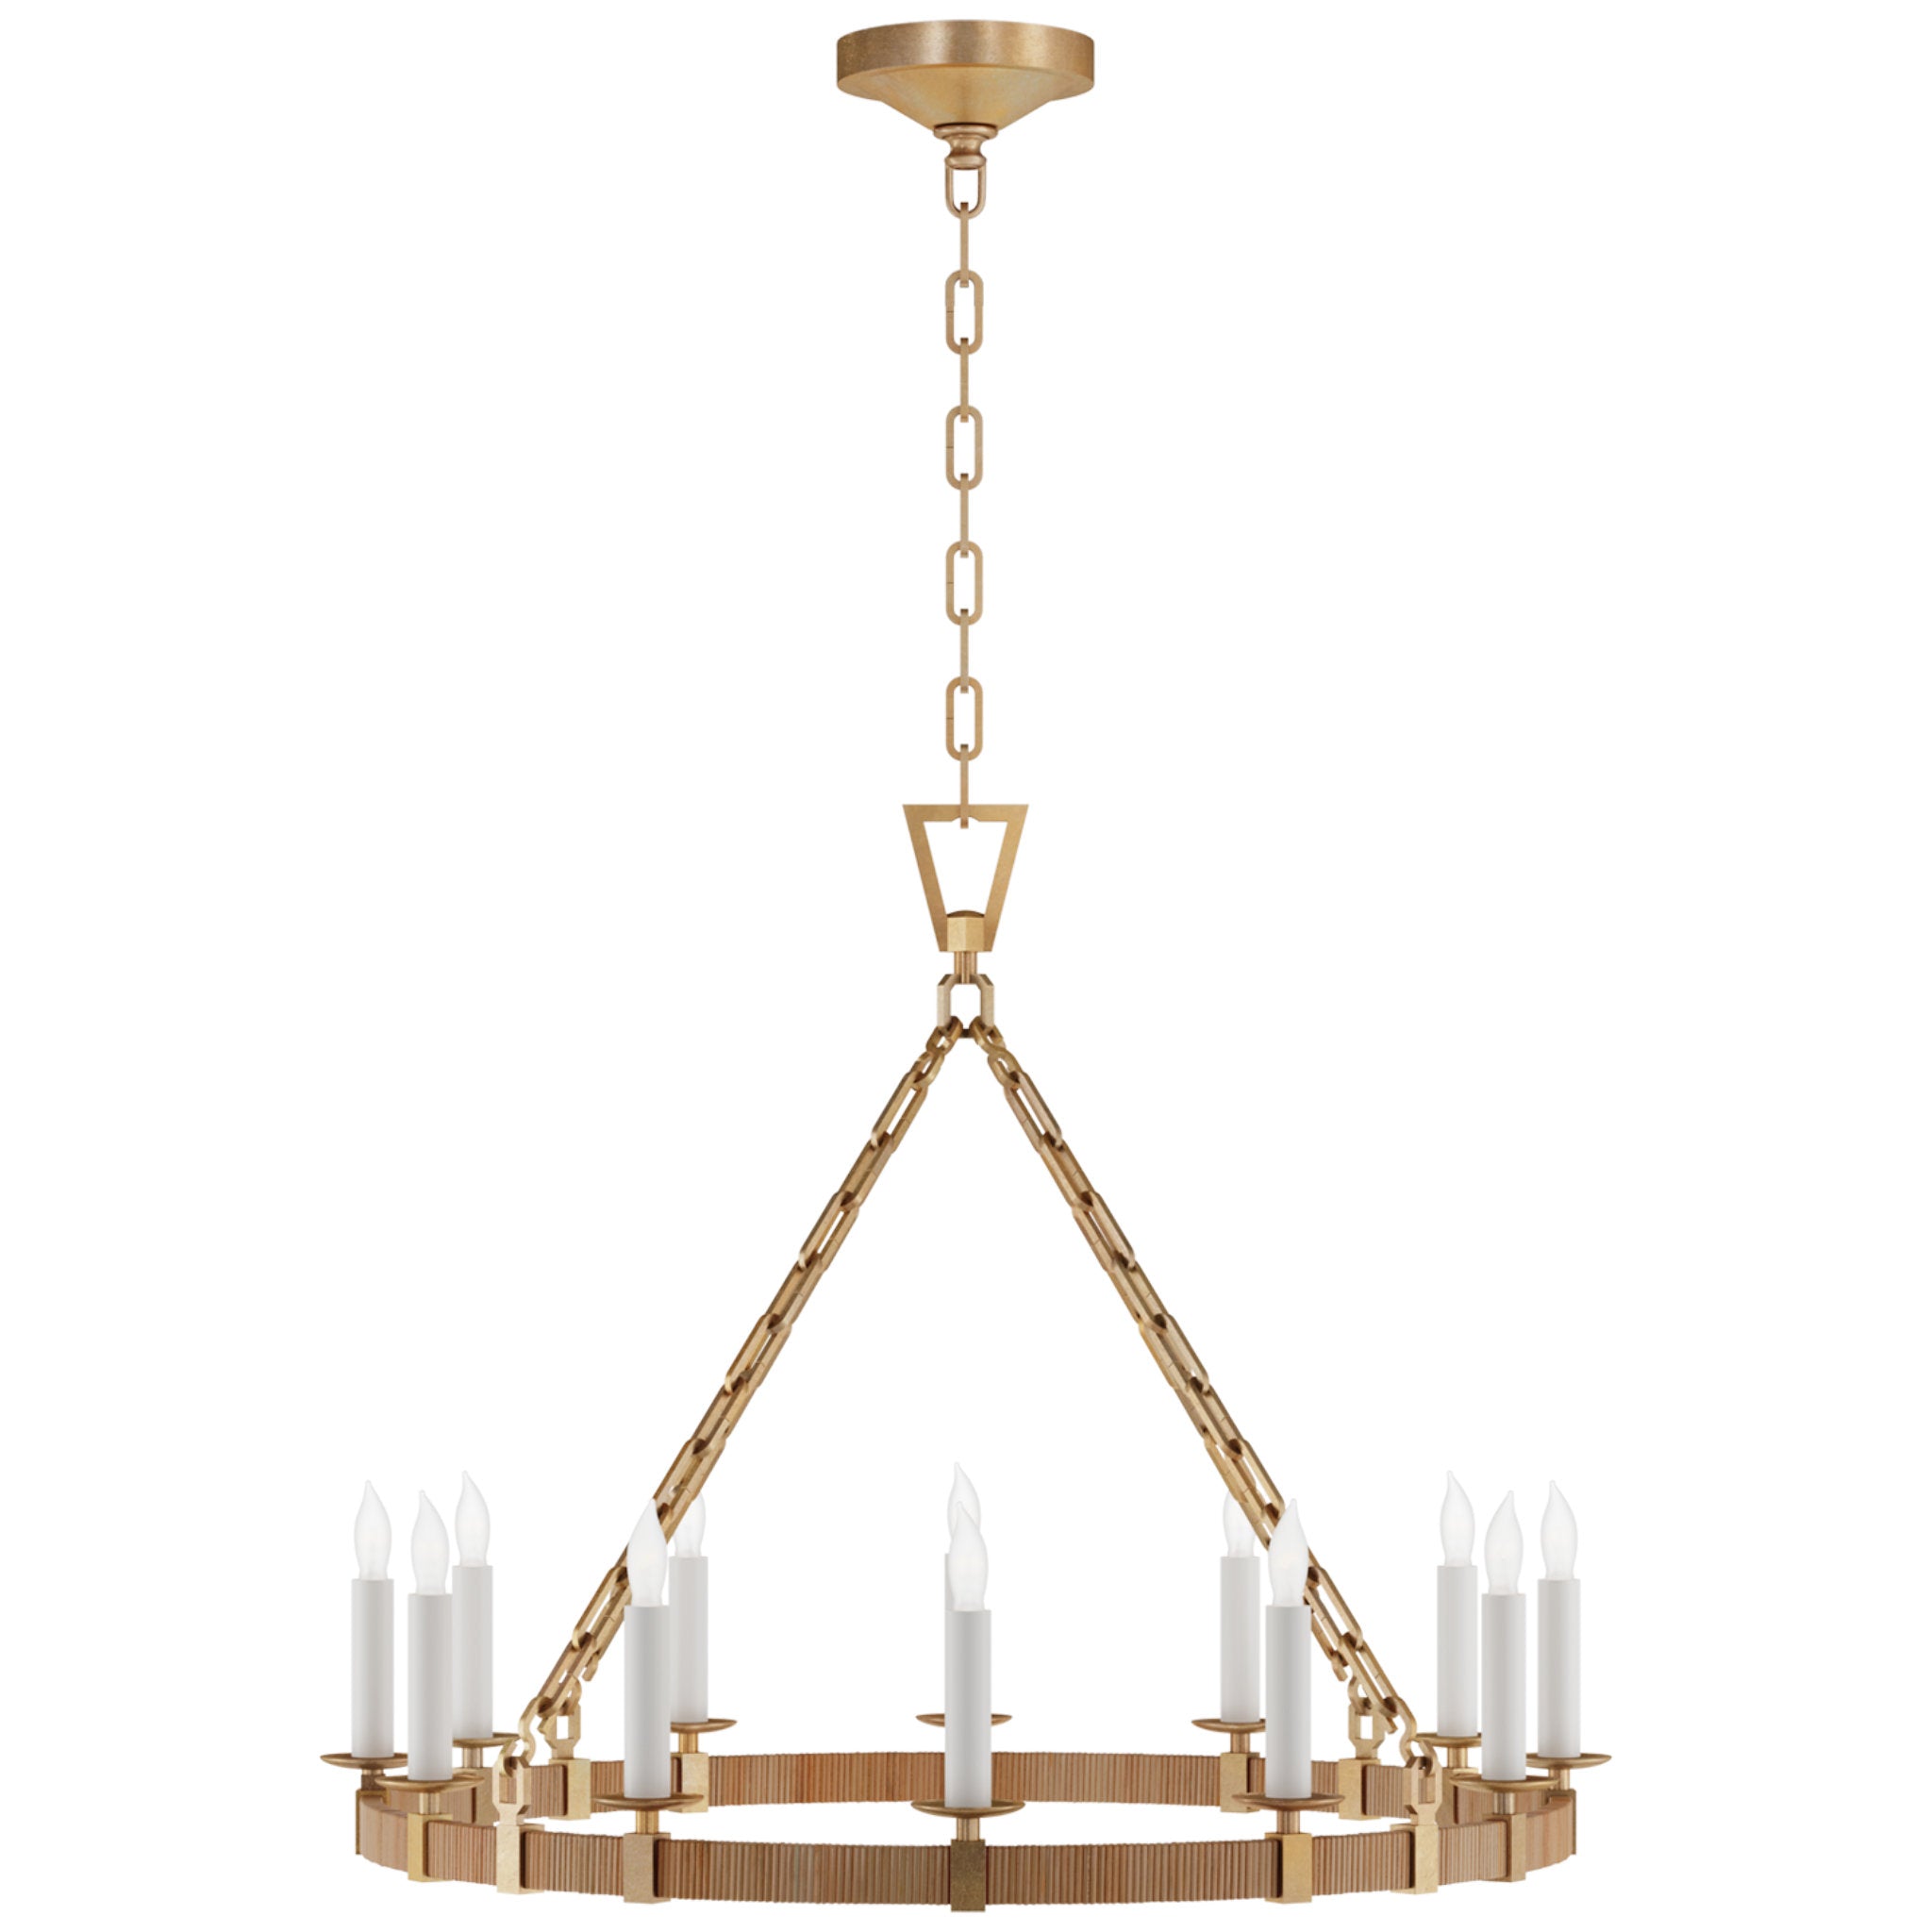 Chapman & Myers Darlana Medium Wrapped Ring Chandelier in Antique-Burnished Brass and Natural Rattan